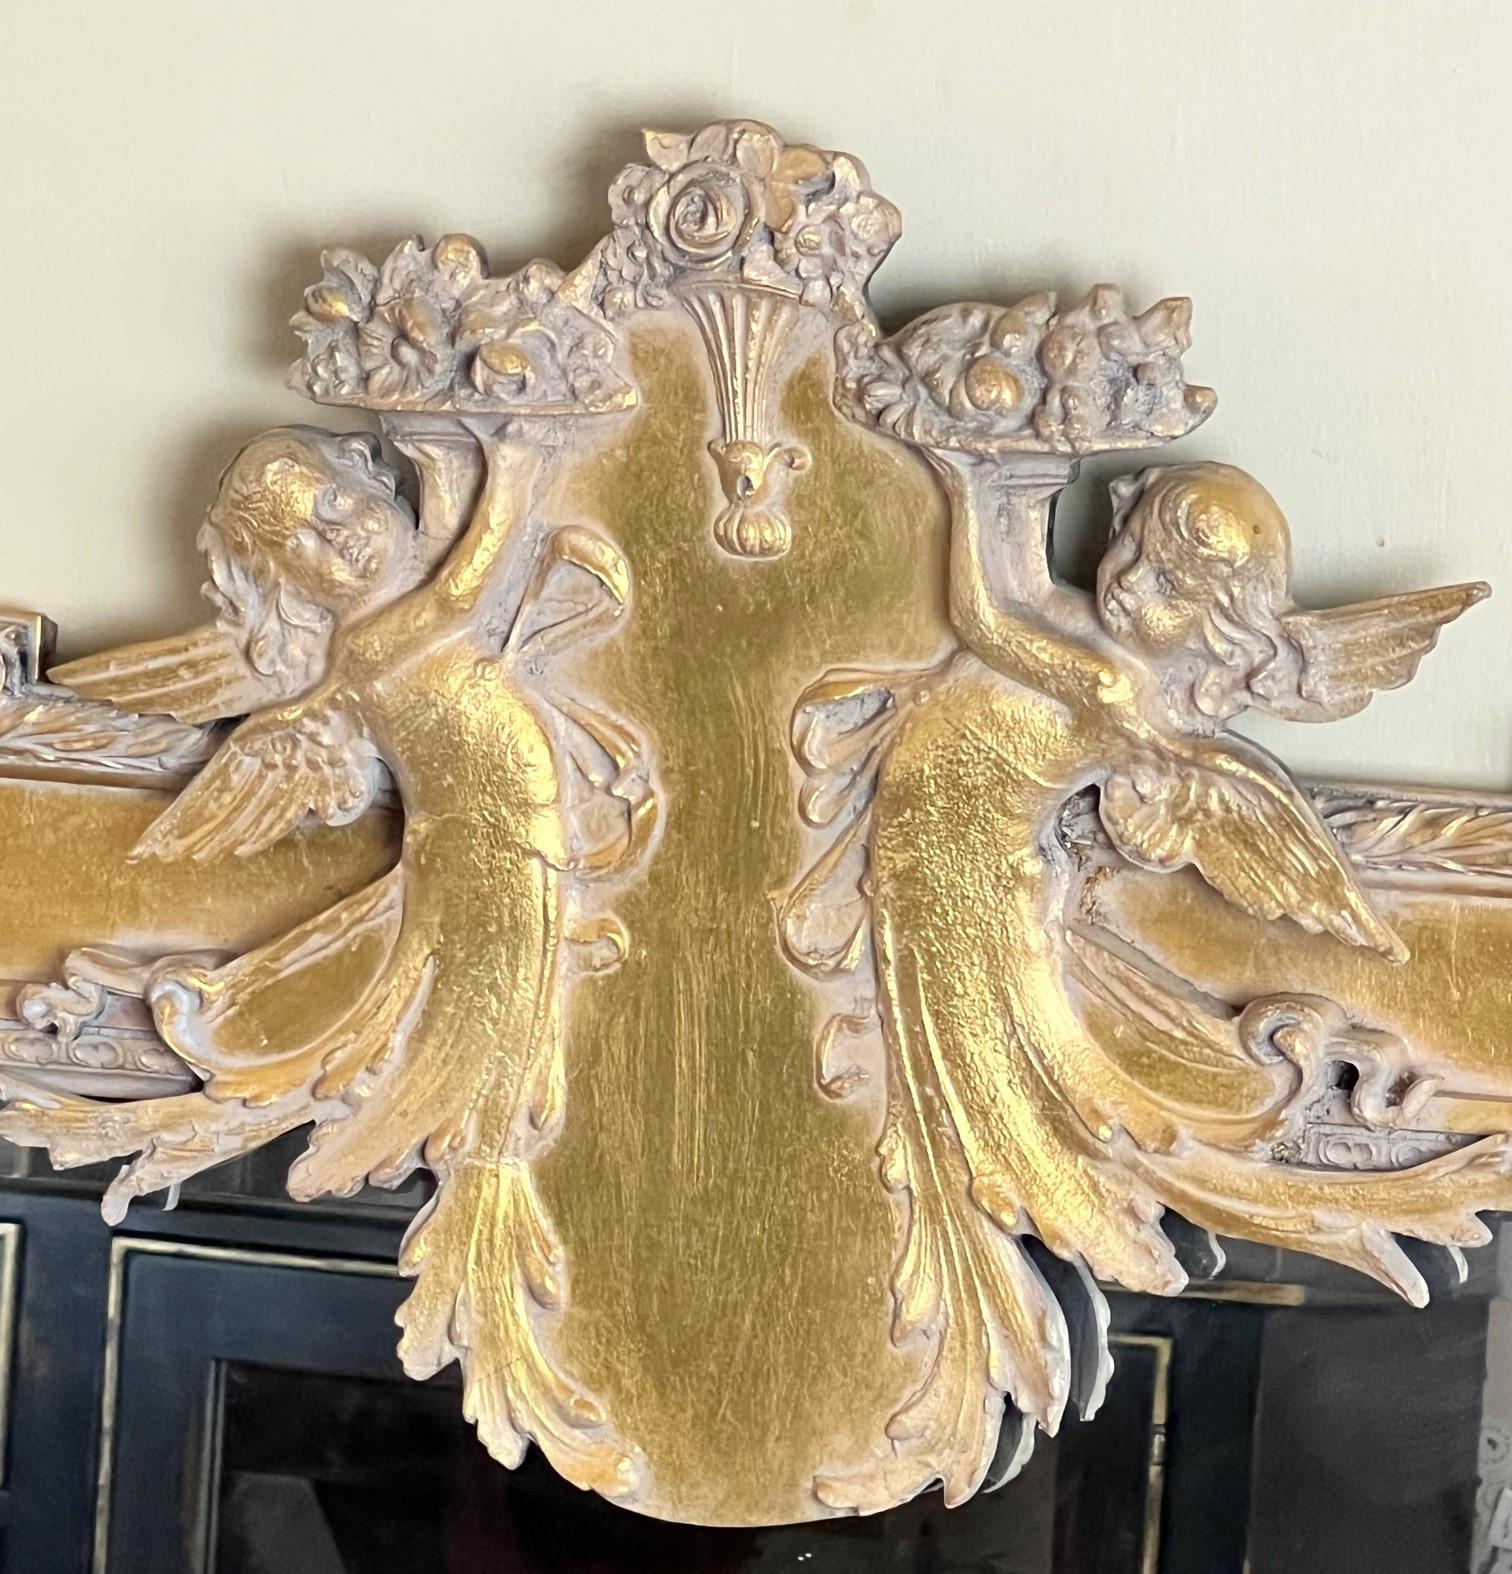 20th C. Neoclassical Style Giltwood Mirror with Cherub and Floral Decoration In Good Condition For Sale In Morristown, NJ